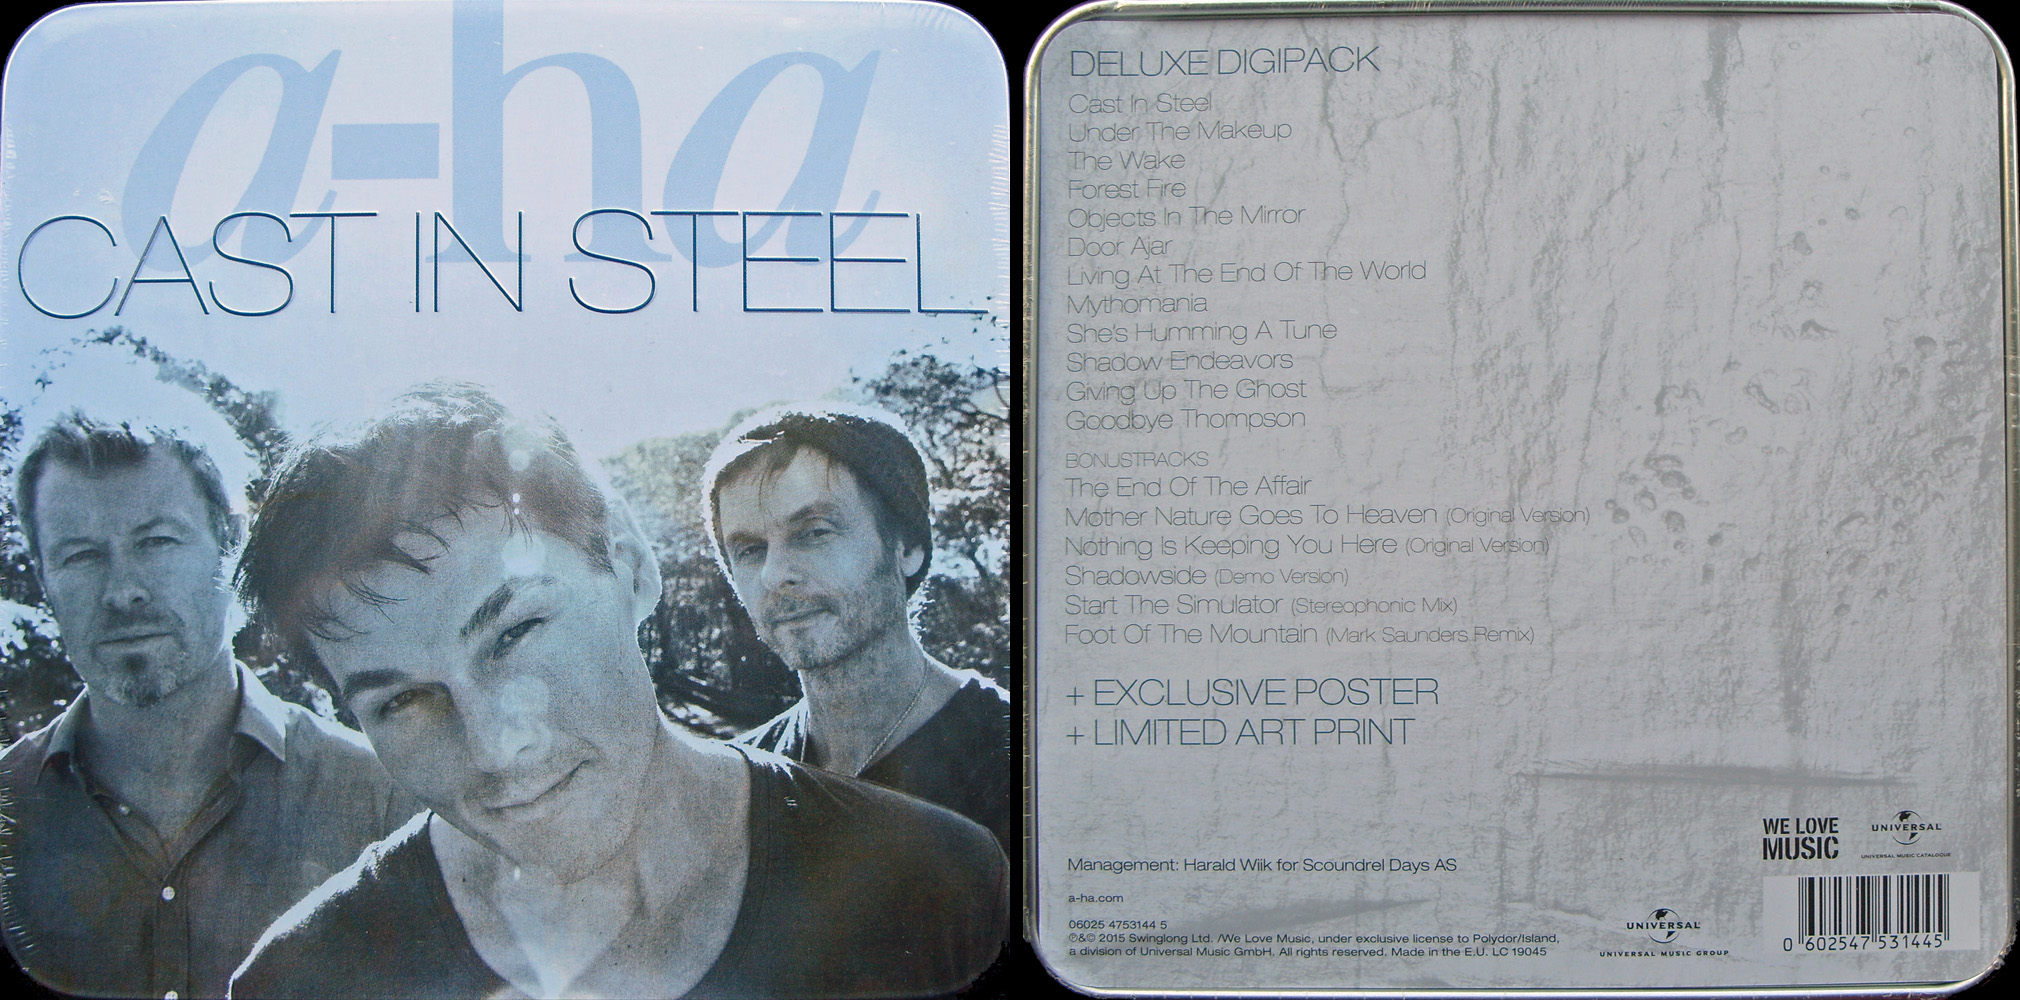 Cast In Steel limited box - click to enlarge